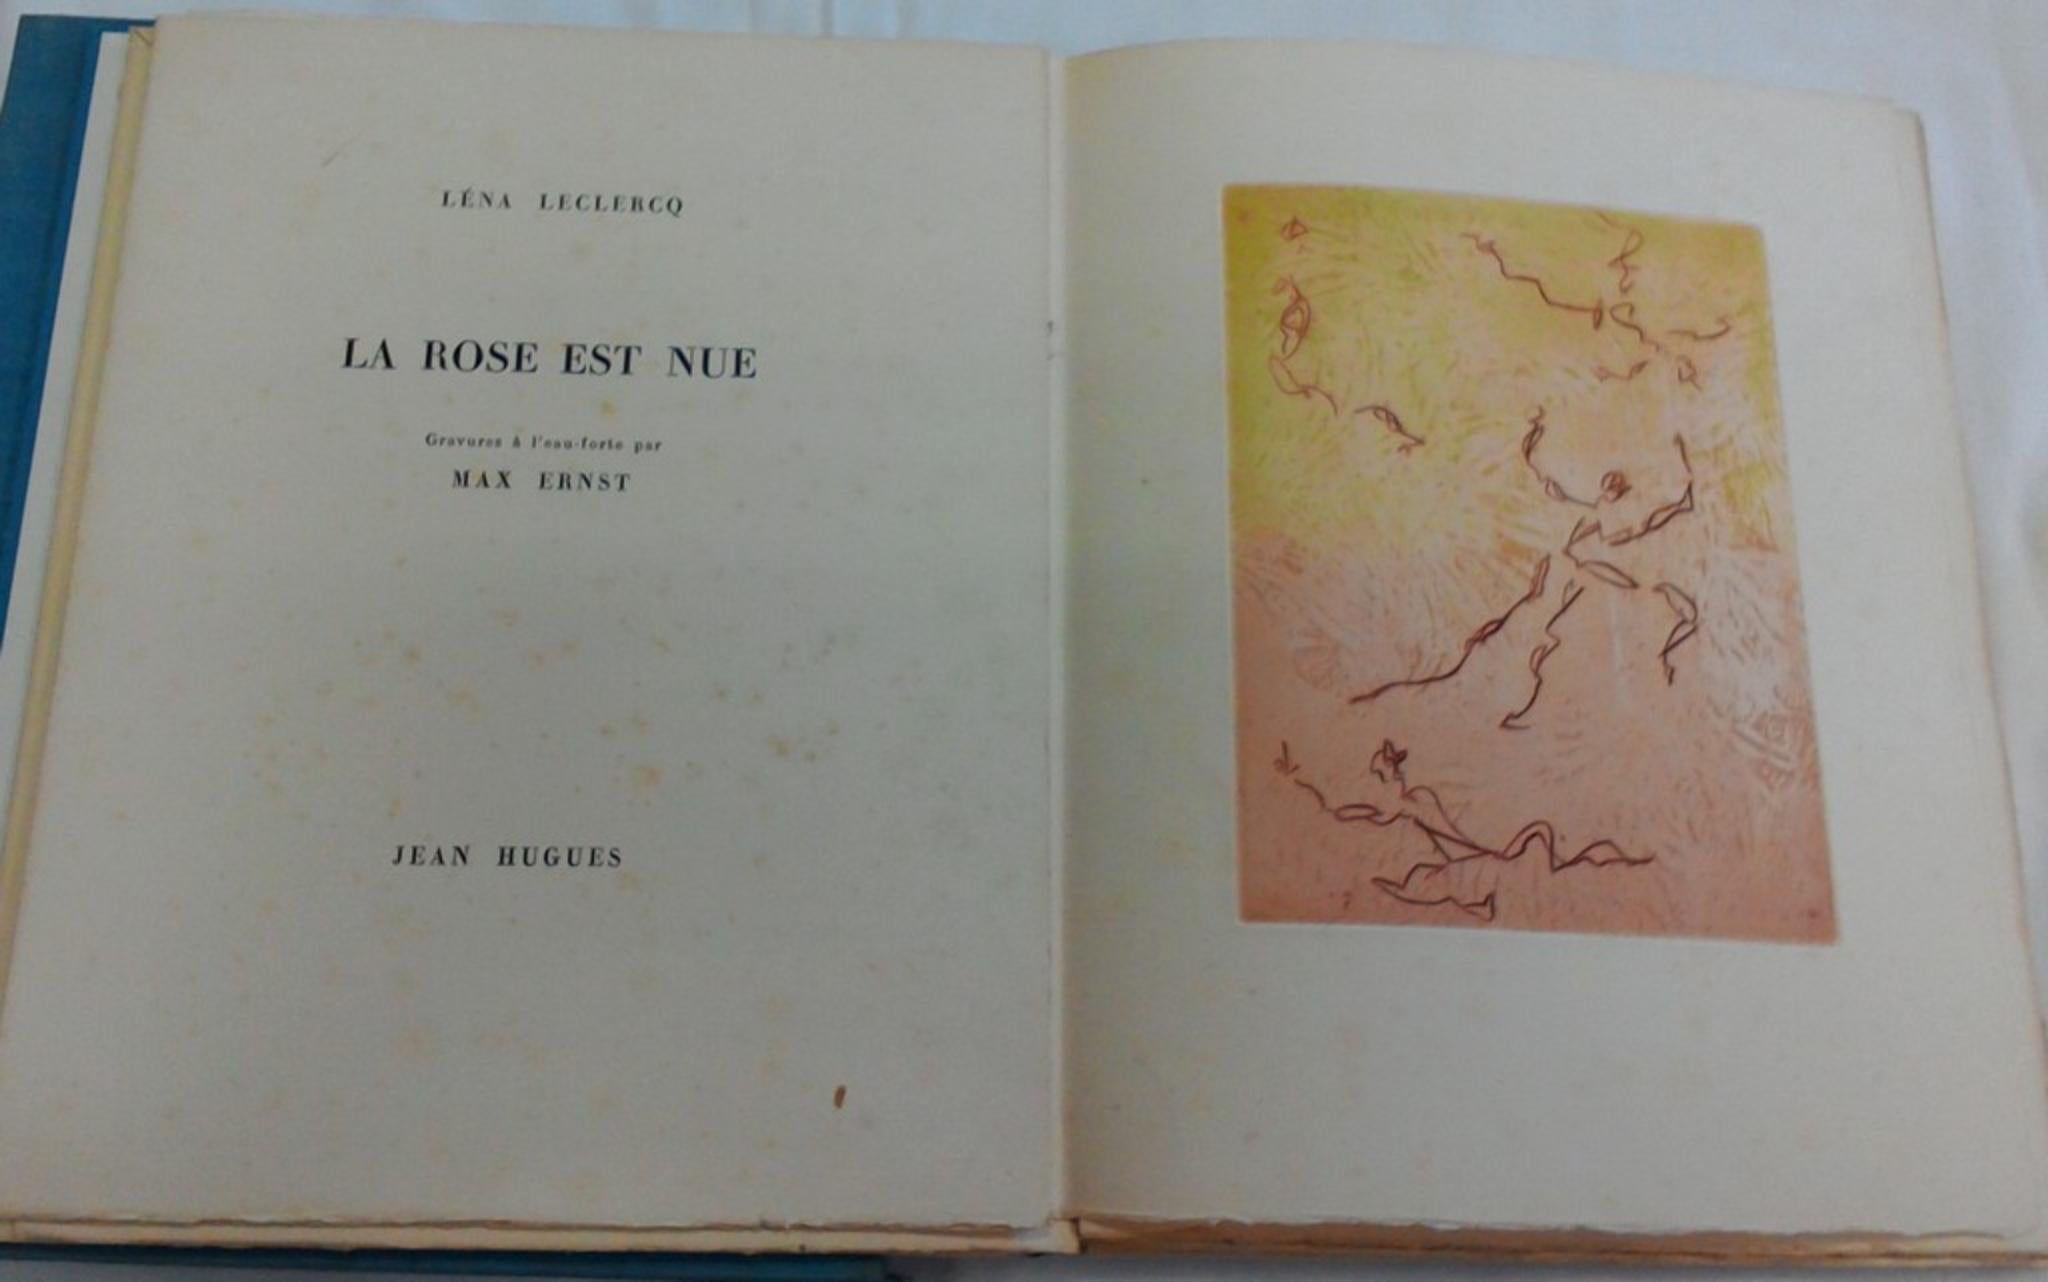 Le Rose est Nue - Rare Book Illustrated by Max Ernst  - 1960